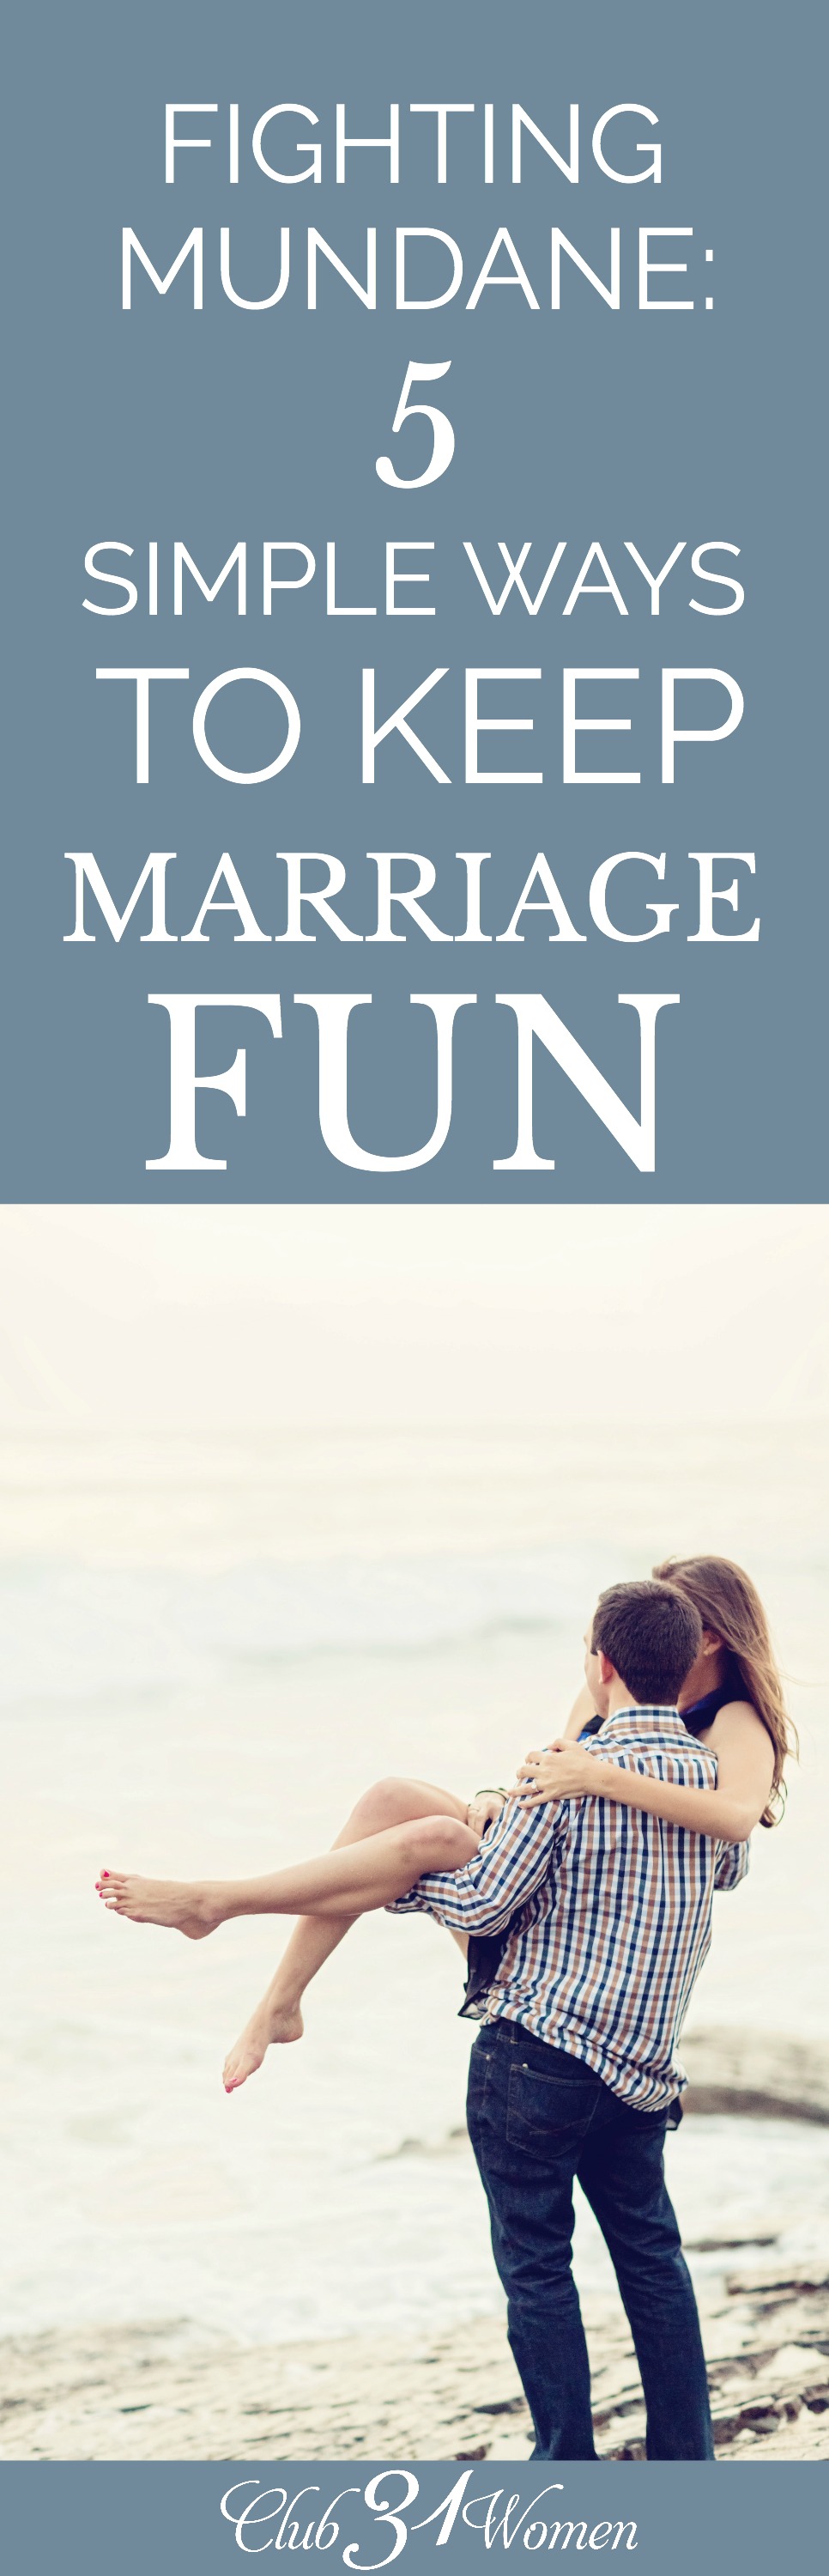 Building a marriage and raising a family is hard work and often requires us to make time and space to just stop and have a little fun. Here are some ideas! via @Club31Women